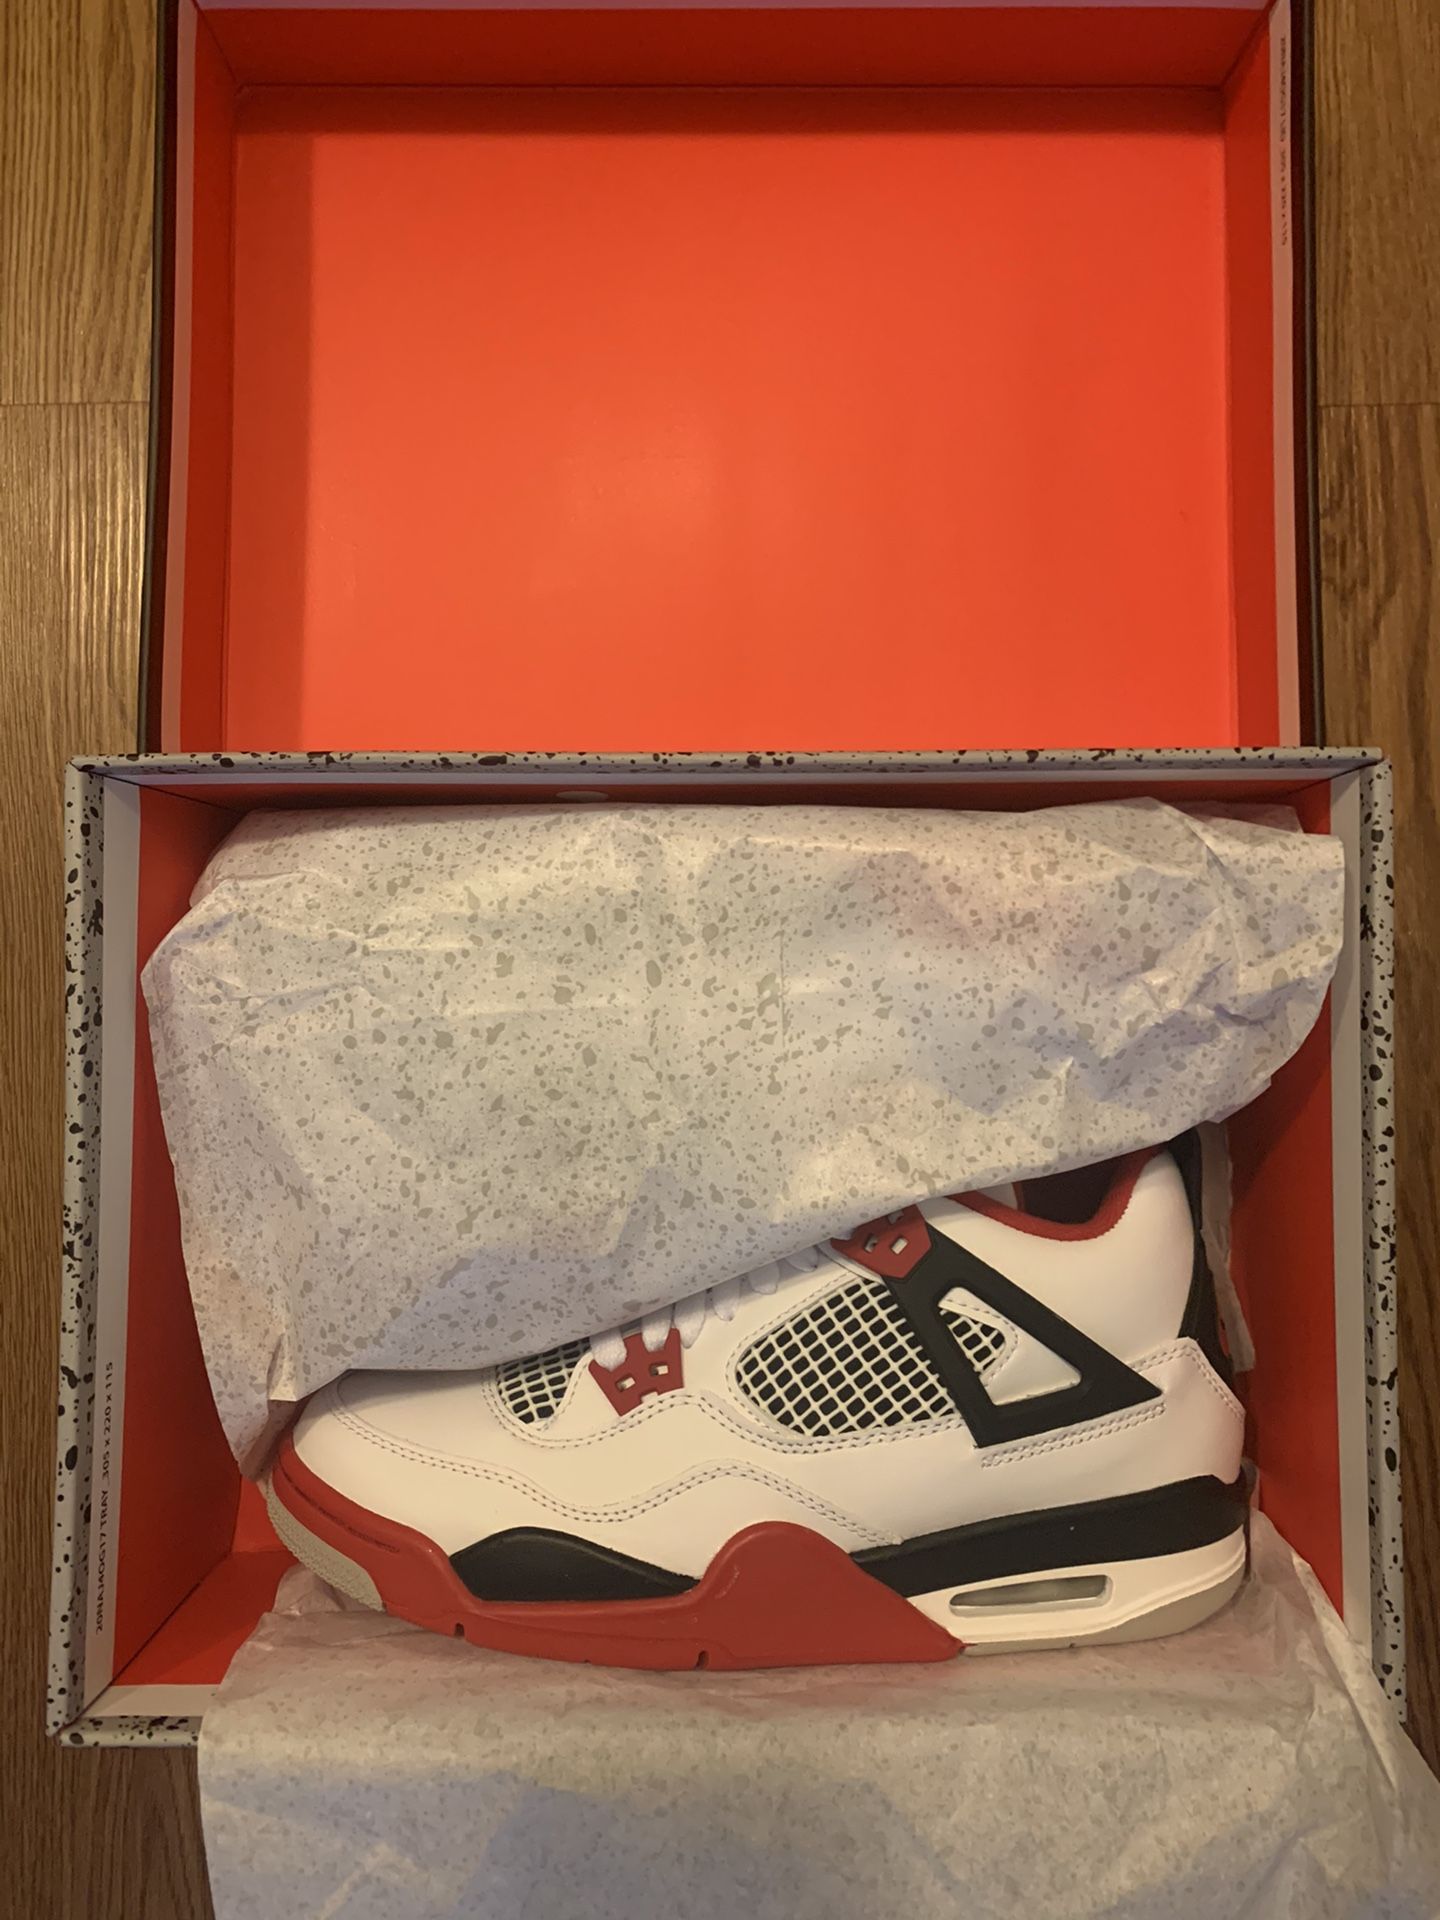 Air Jordan 4 Fire Red Sizes 5, 7, 9, 10.5, 13 In Hand